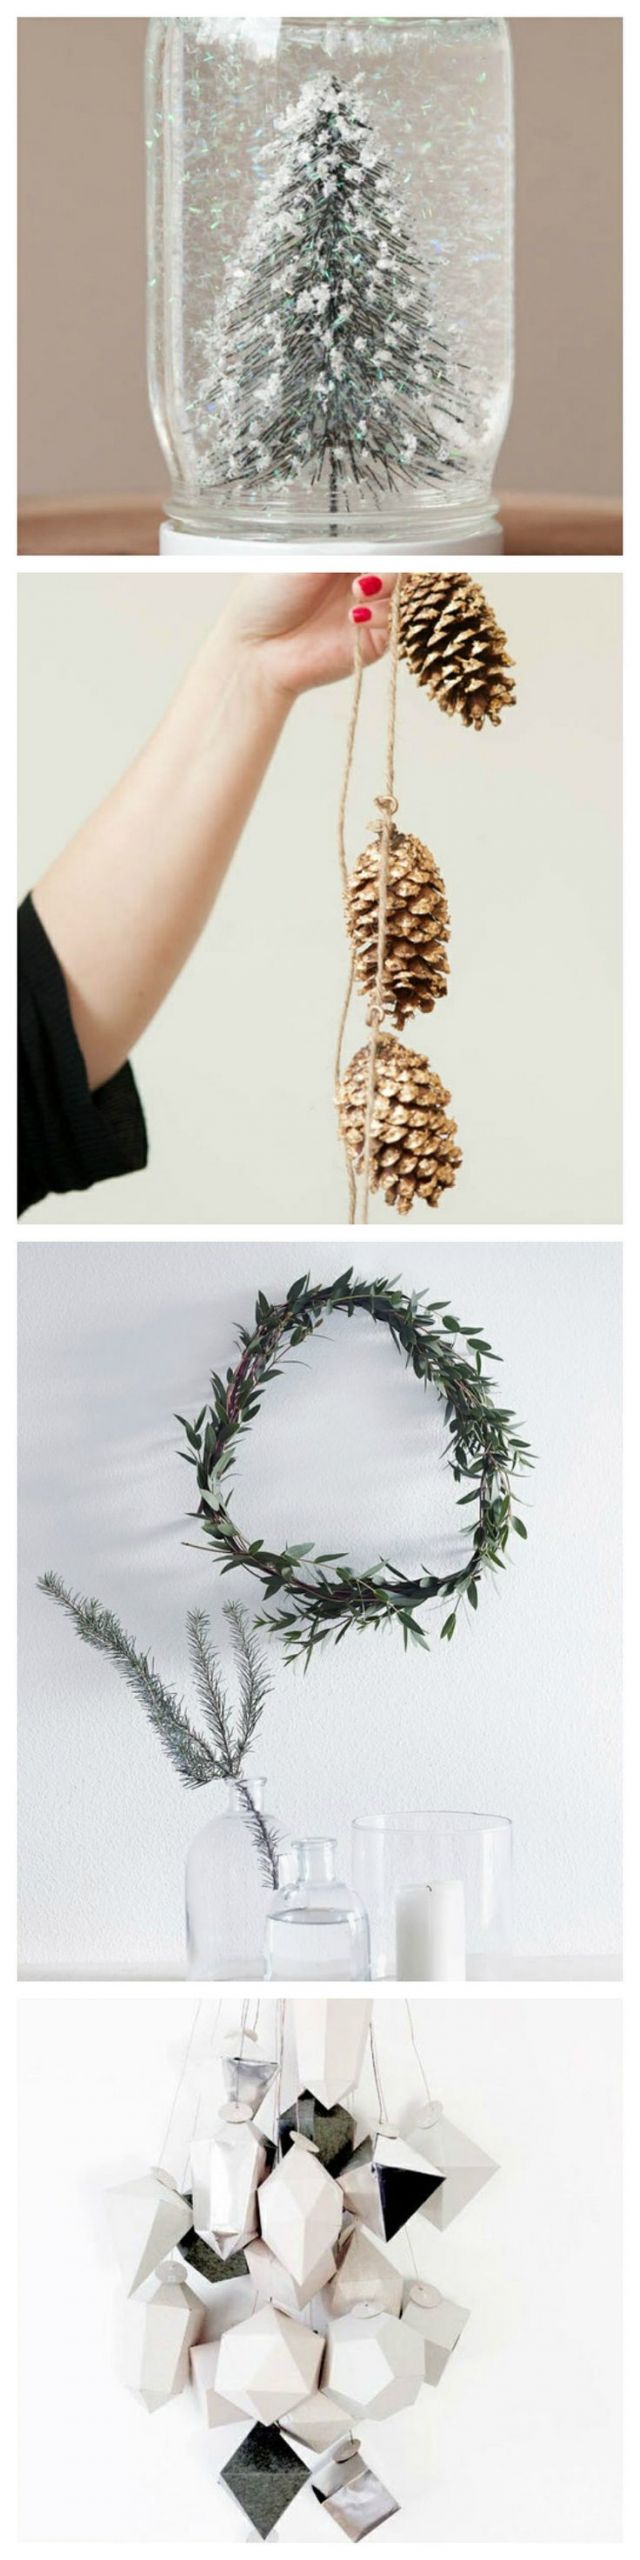 DIY Christmas Crafts Pinterest
 5 Easy DIY Christmas Crafts s and